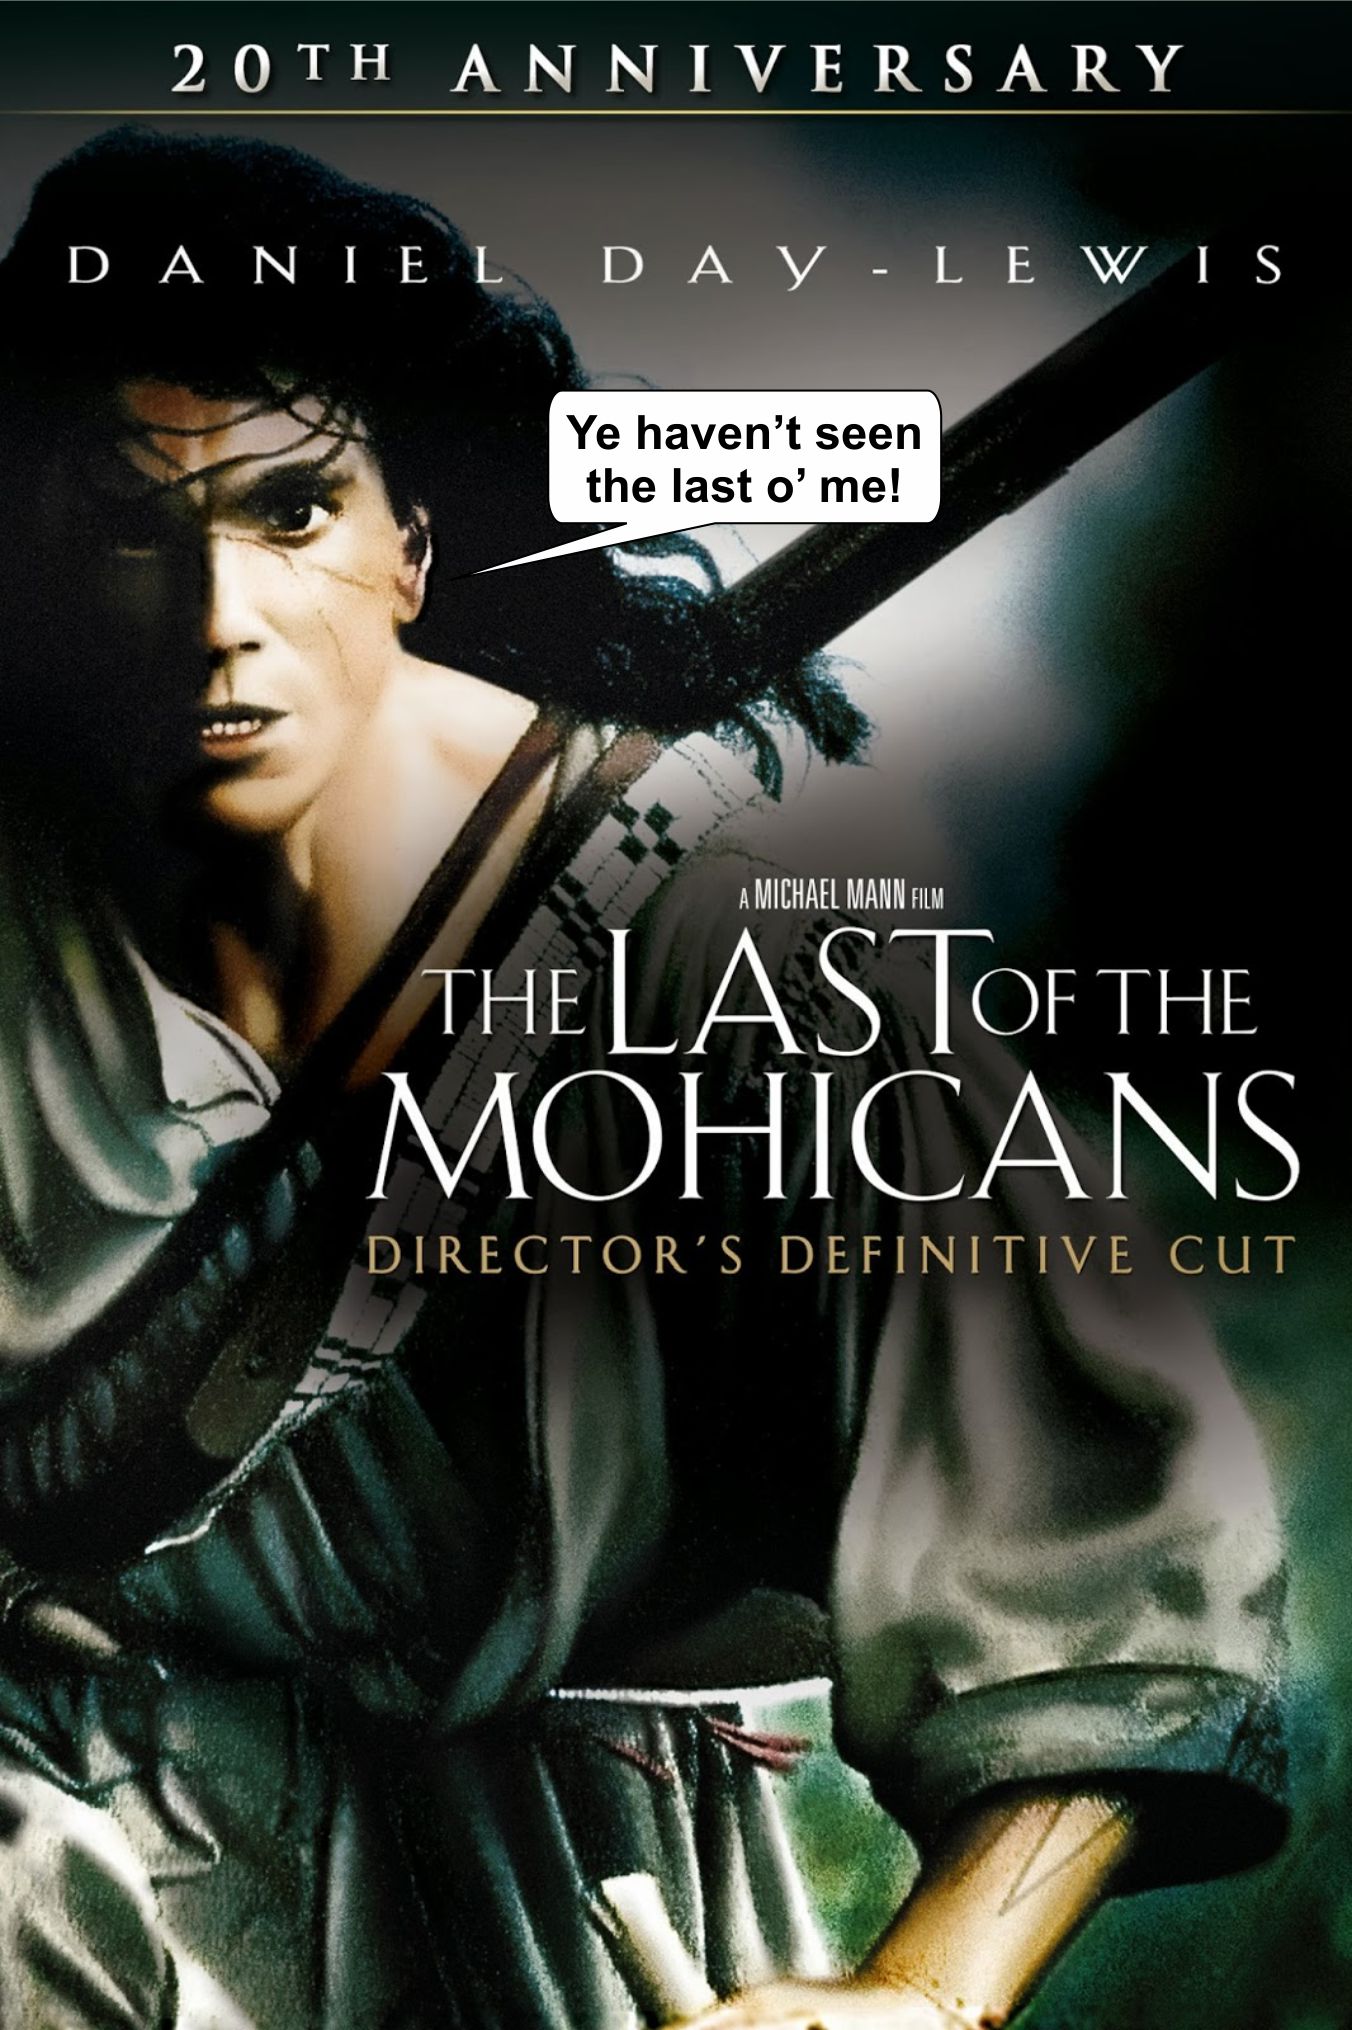 The Last of the Mohicans Director's Cut poster 2